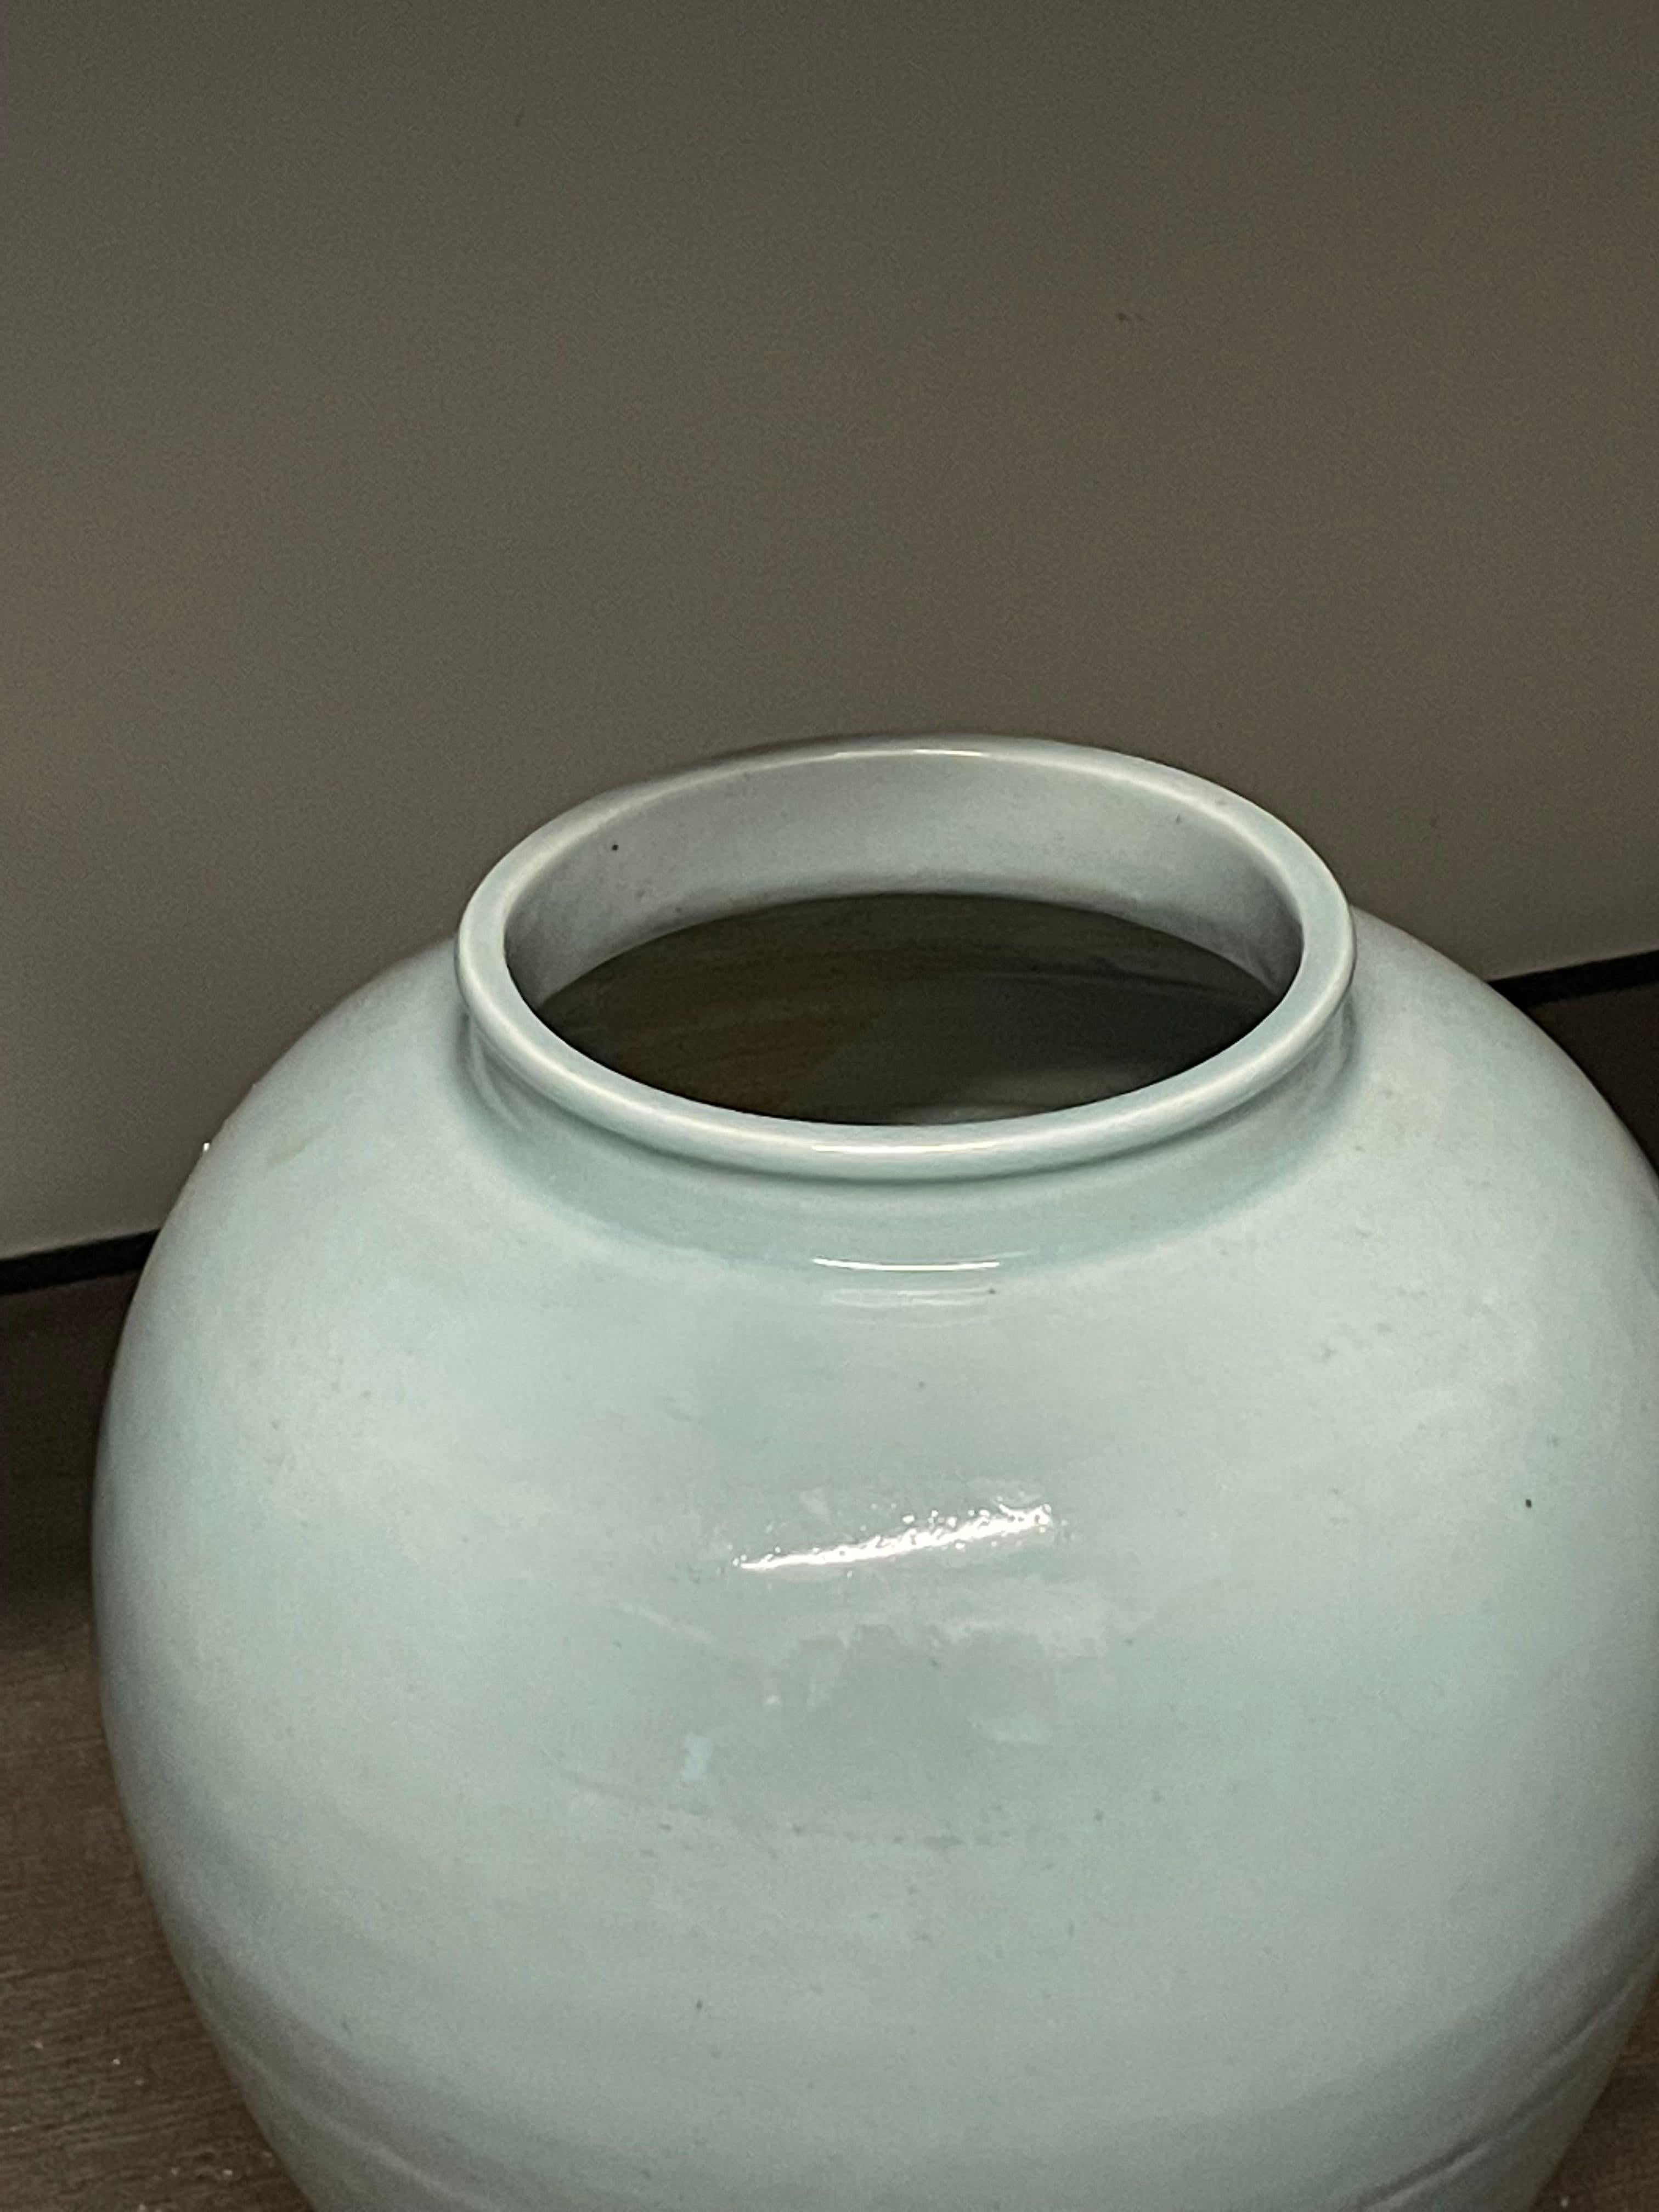 Contemporary Chinese washed turquoise glazed vase.
The glaze gives the vase the appearance of a weathered look.
Wide mouth curved shape.
